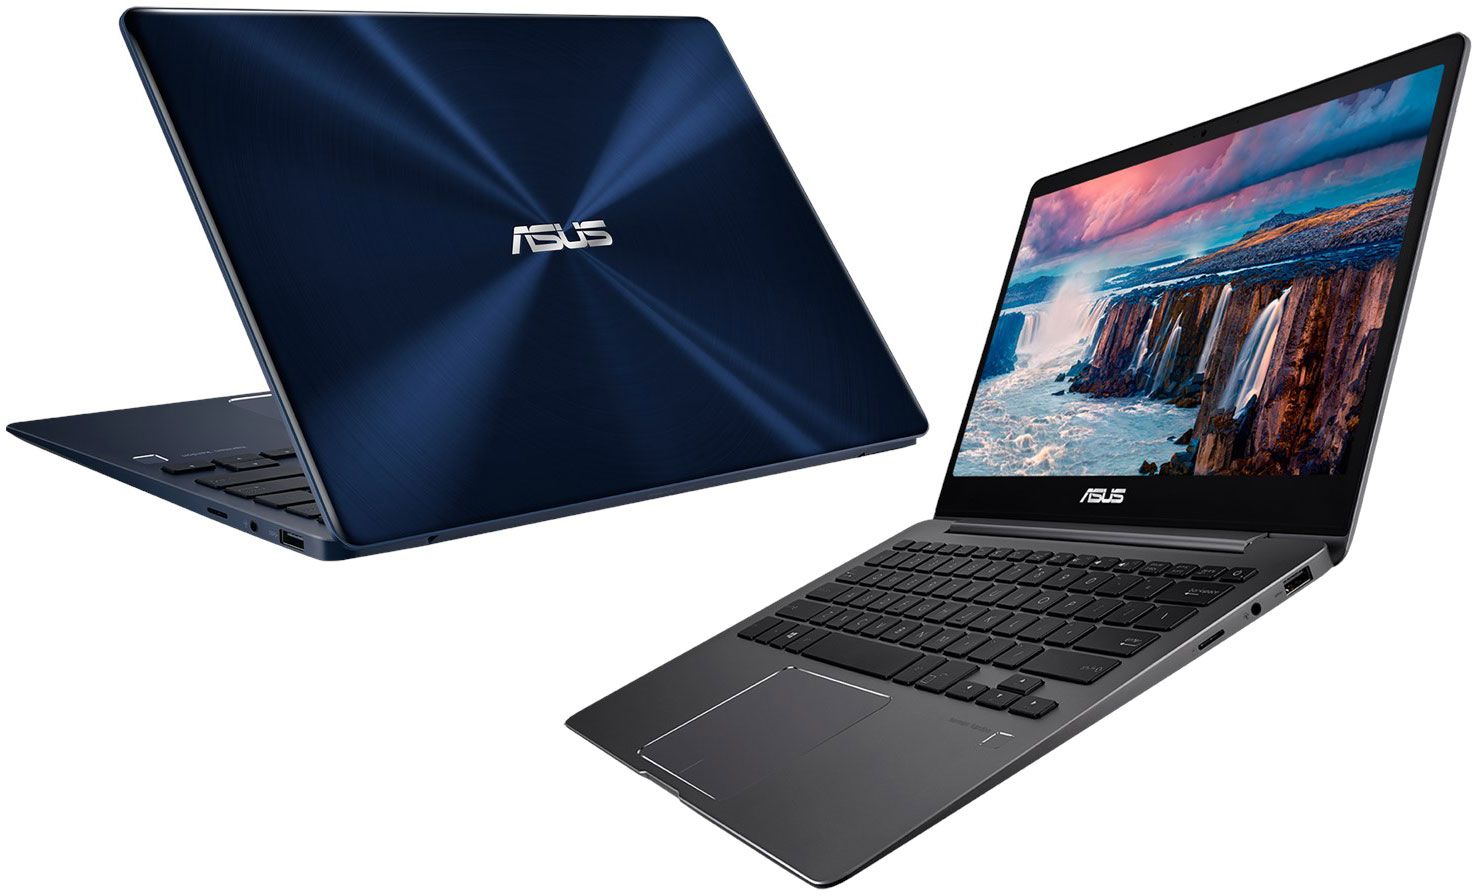 Review of laptops ASUS Zenbook 13 BX333FA and UX331FAL